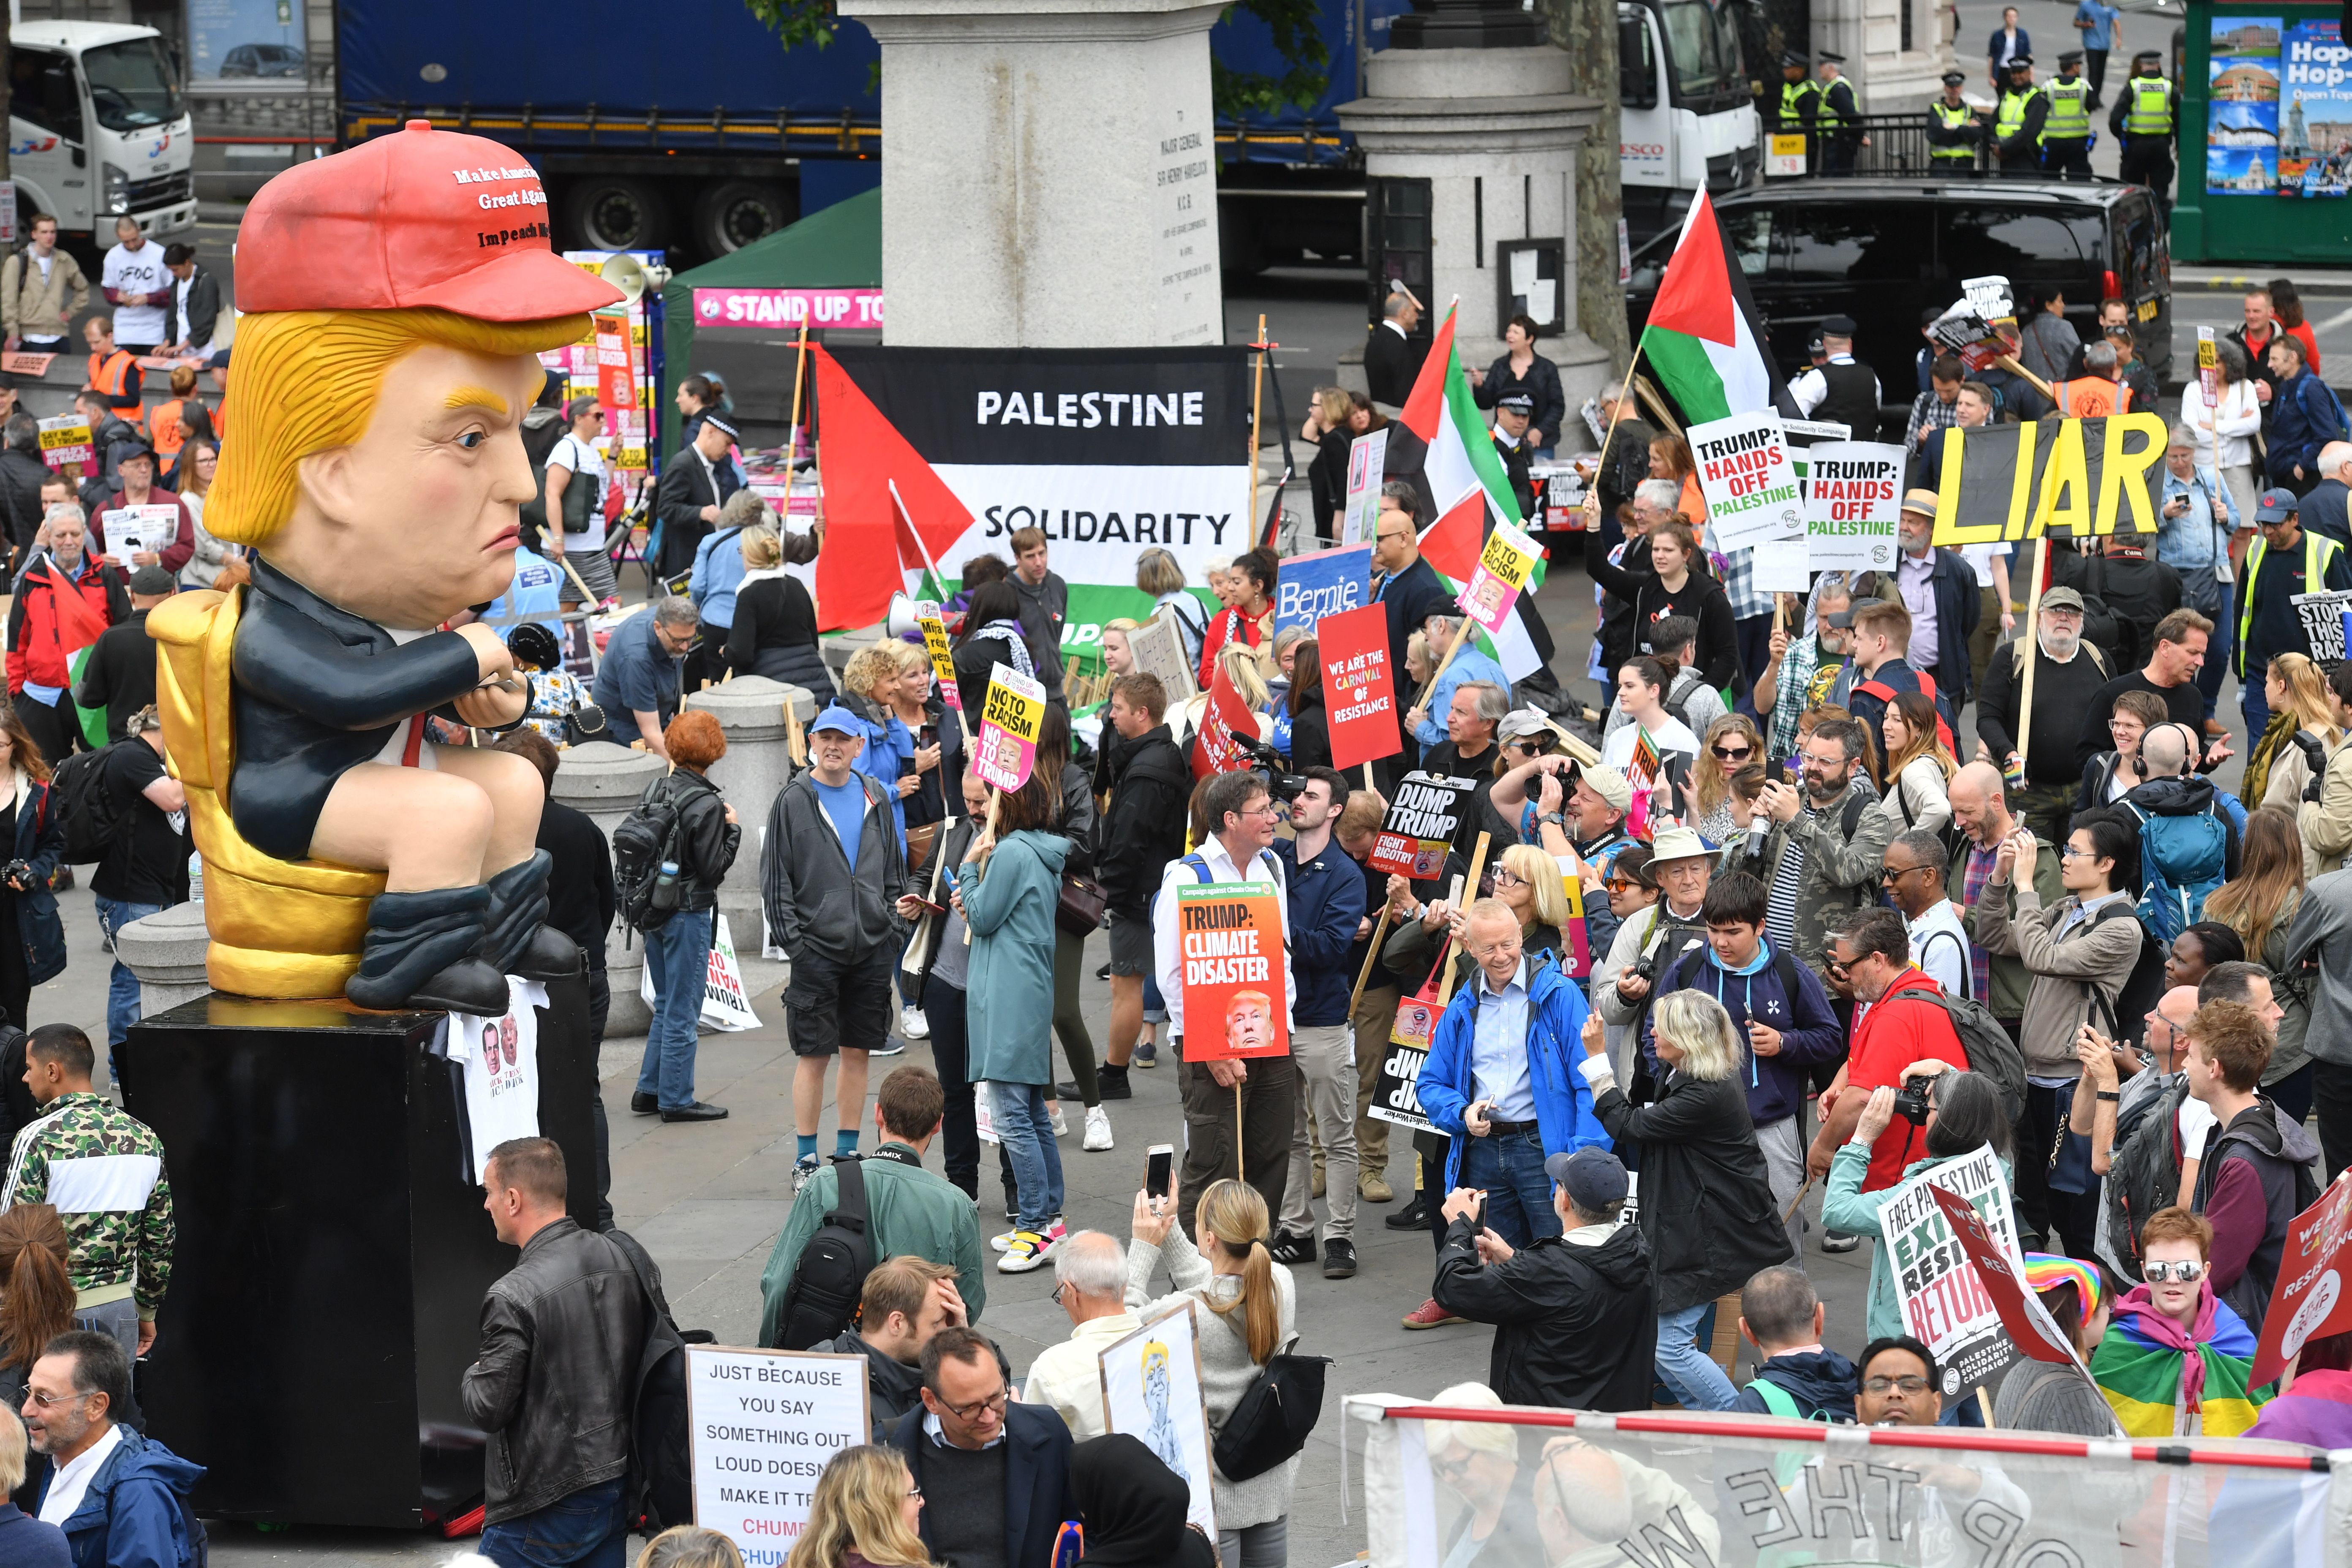 Protestors gather in Trafalgar Square, London on the second day of the state visit to the UK by US President Donald Trump. 